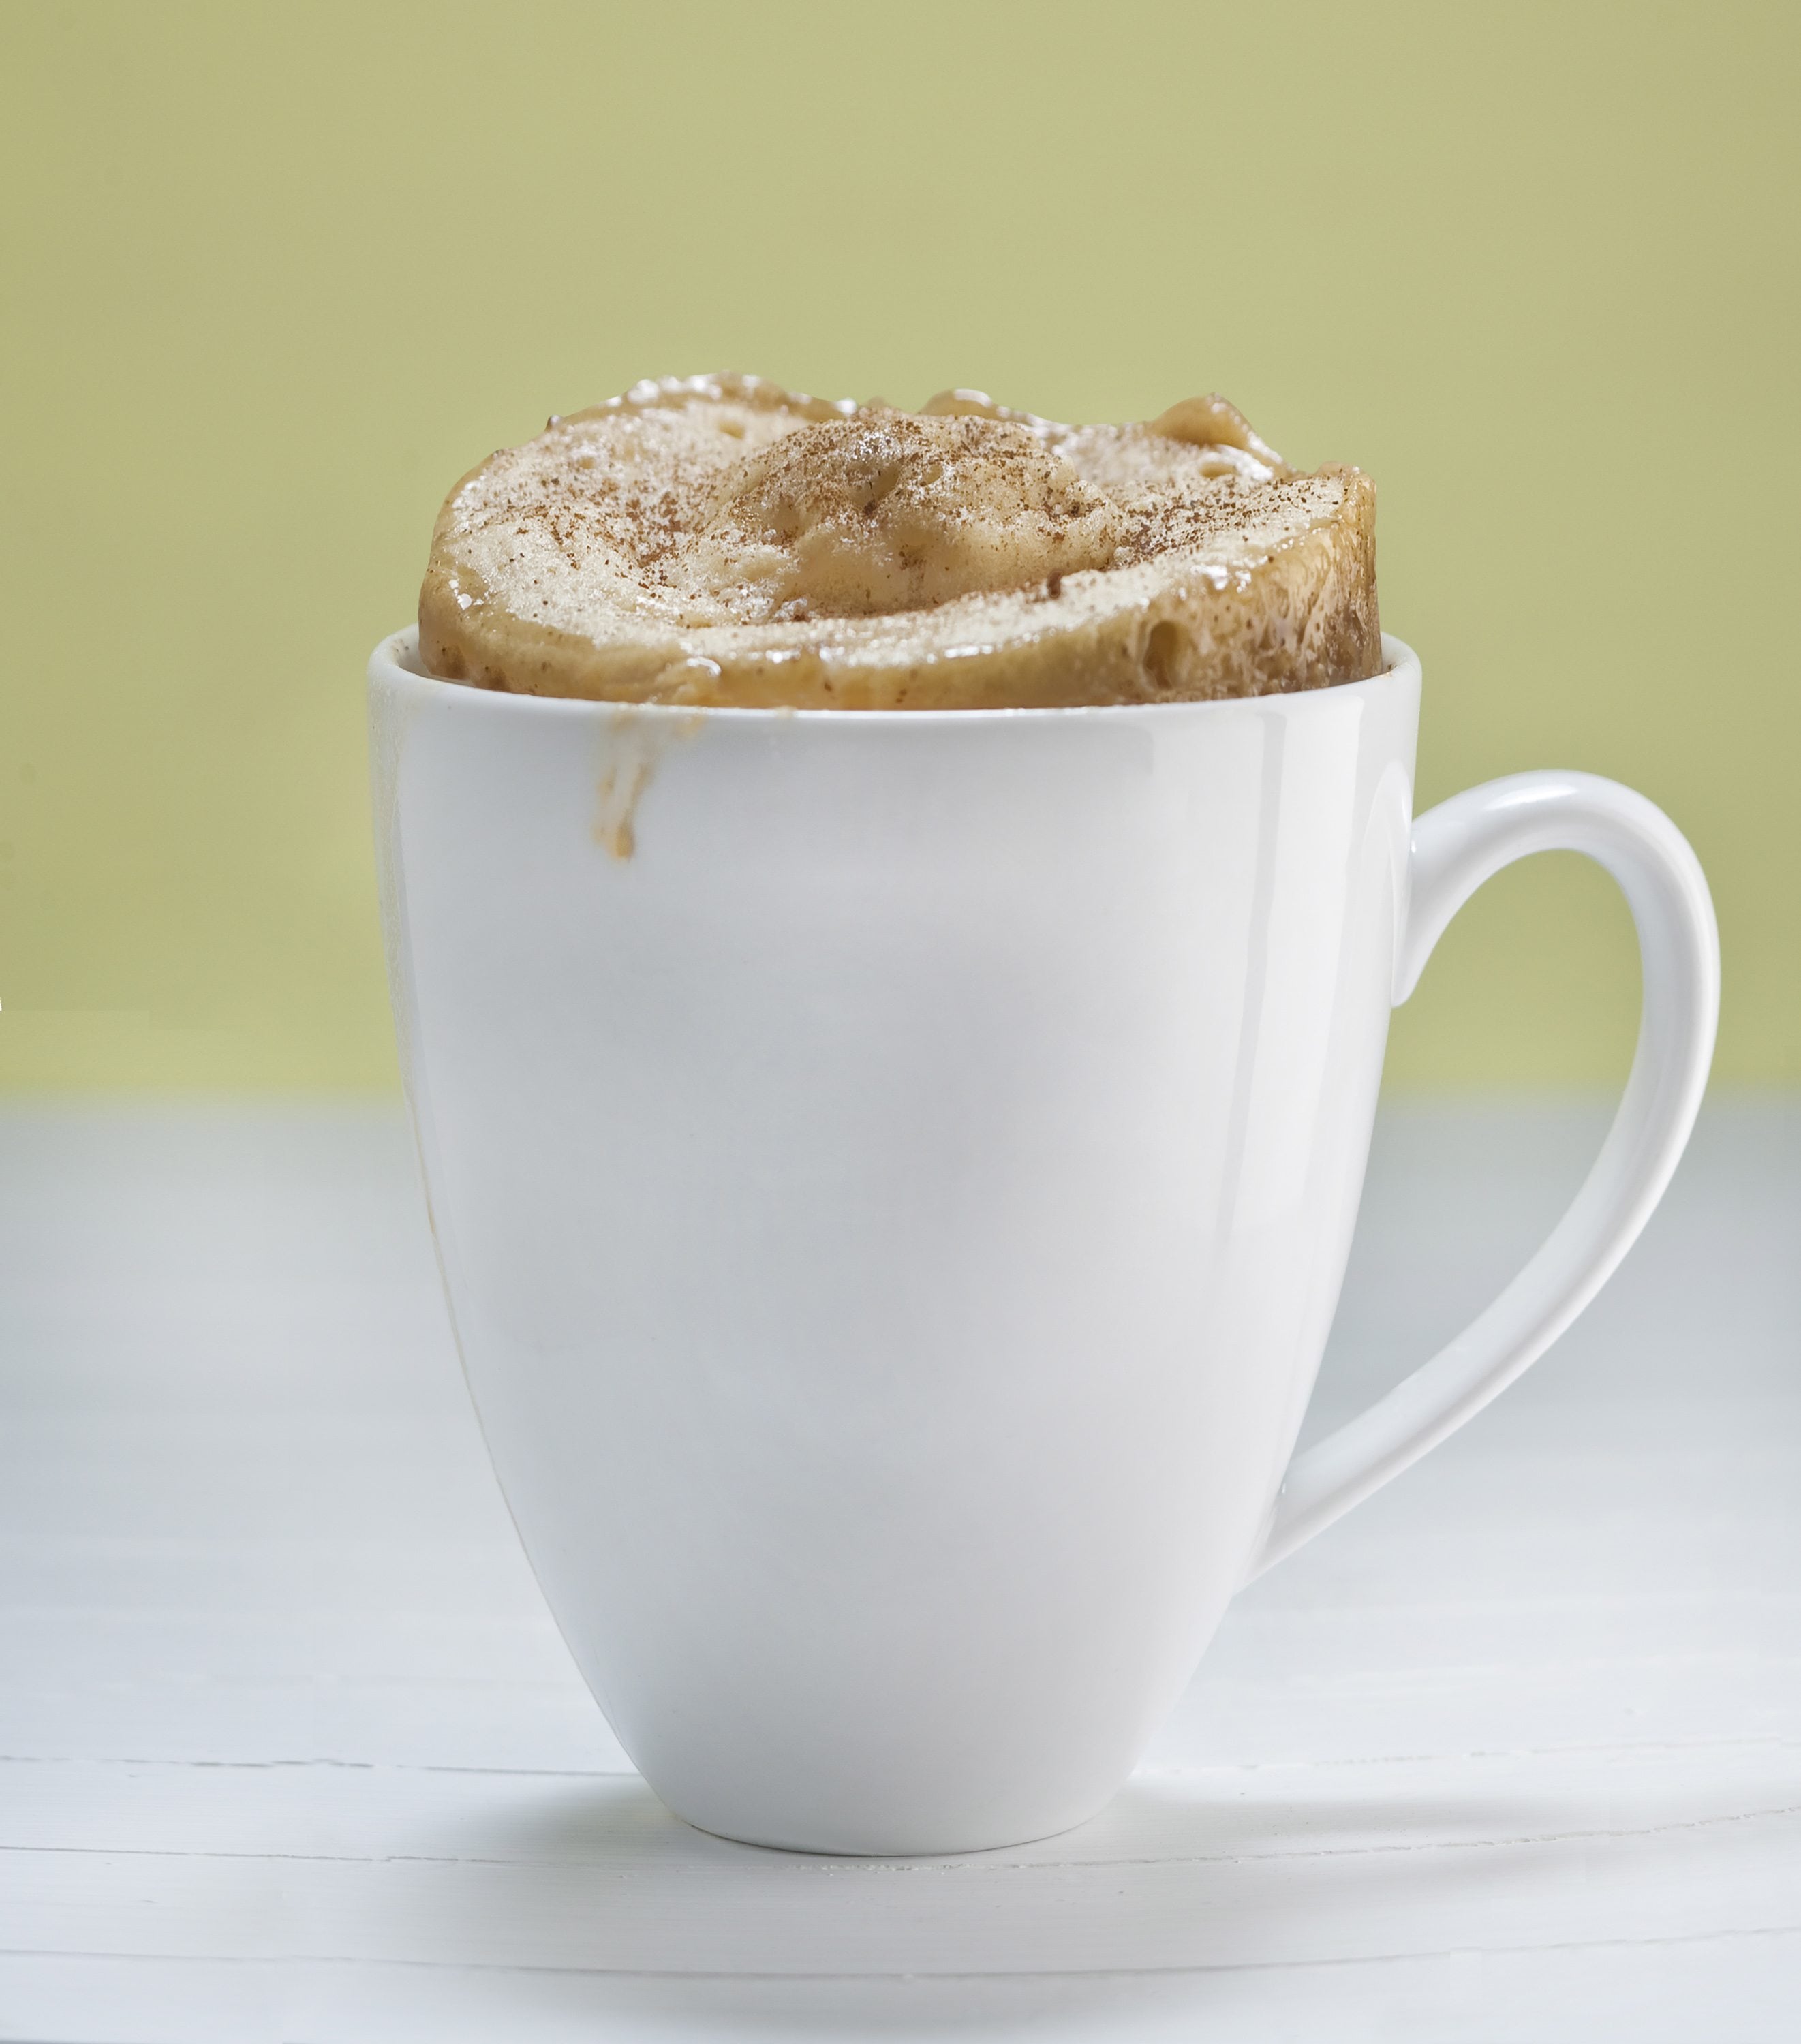 A coffee cup is the perfect vessel for a treat such as Coffee Cup Coffeecake.